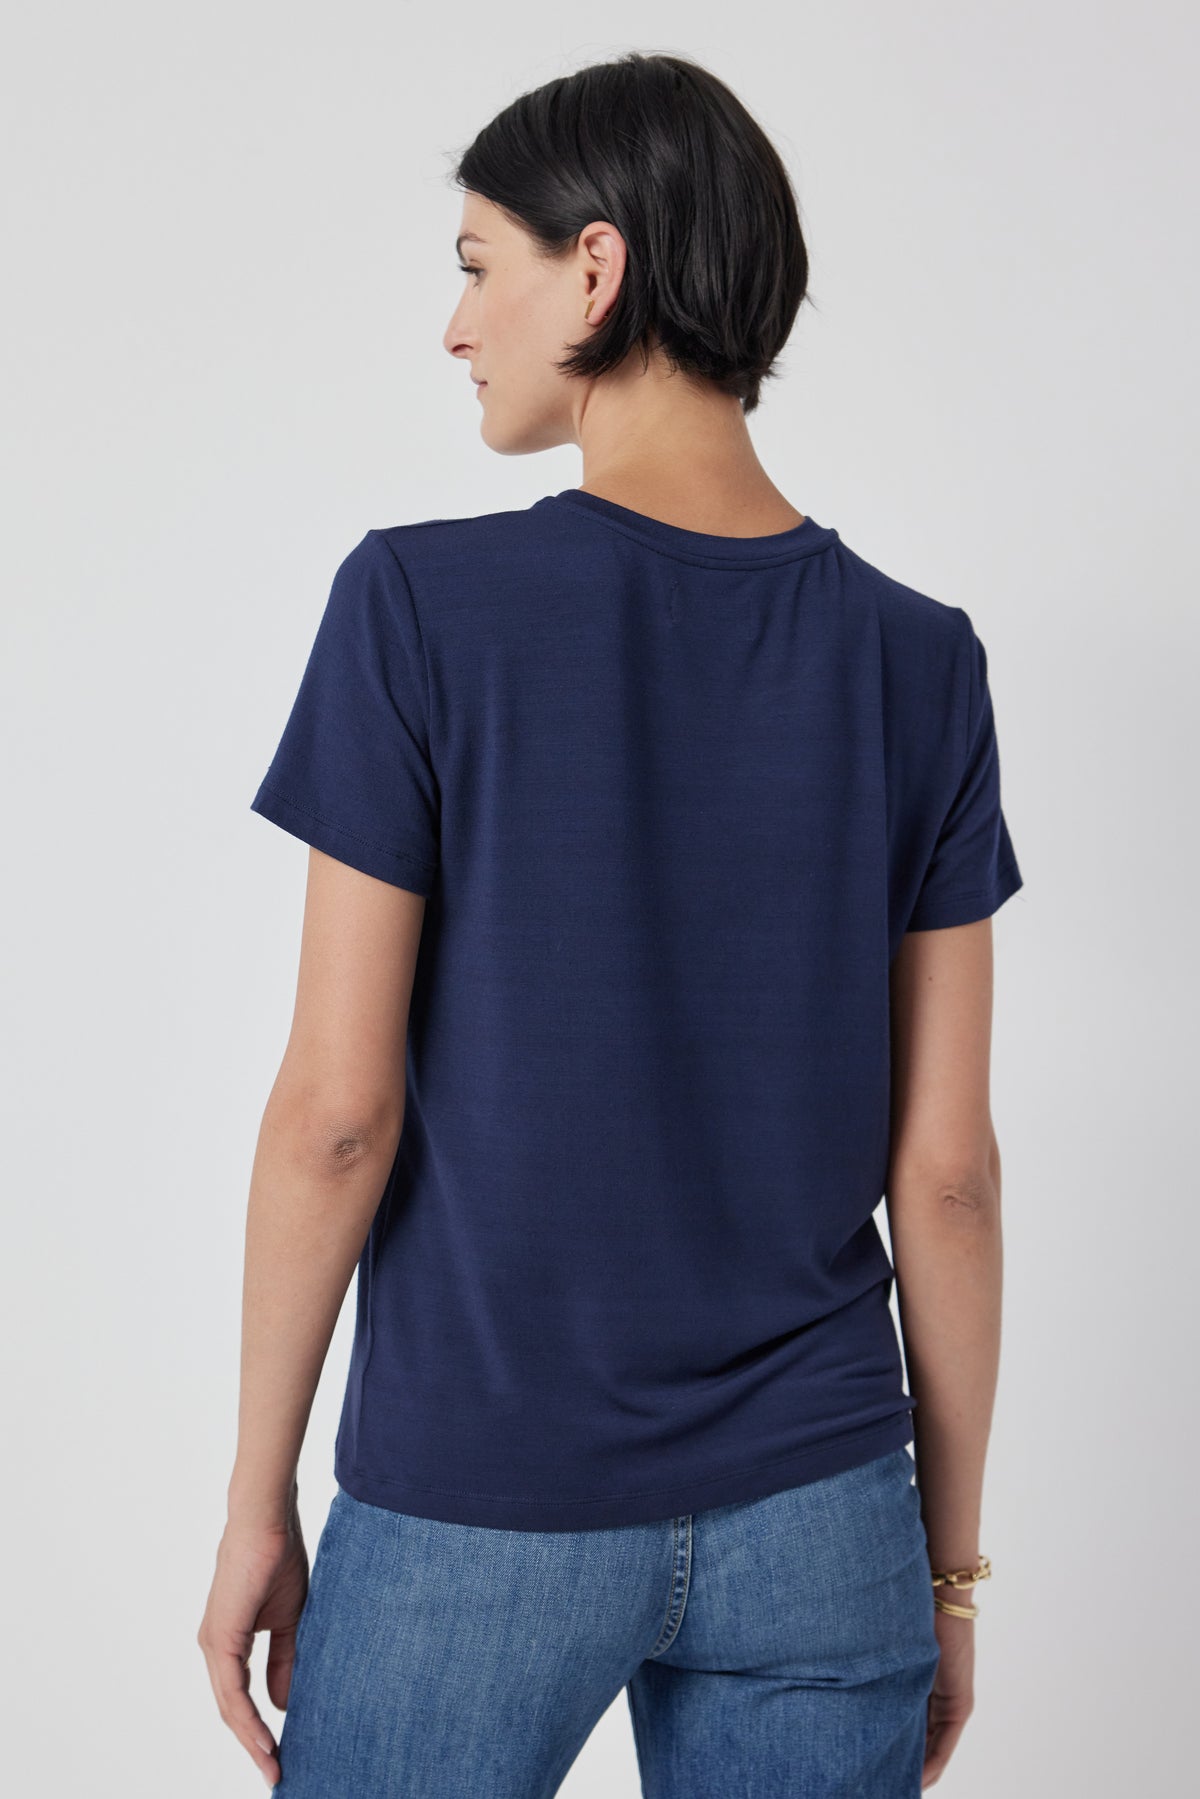 Woman posing with her back turned to the camera, wearing a navy blue Velvet by Jenny Graham SOLANA TEE and jeans.-36463663907009